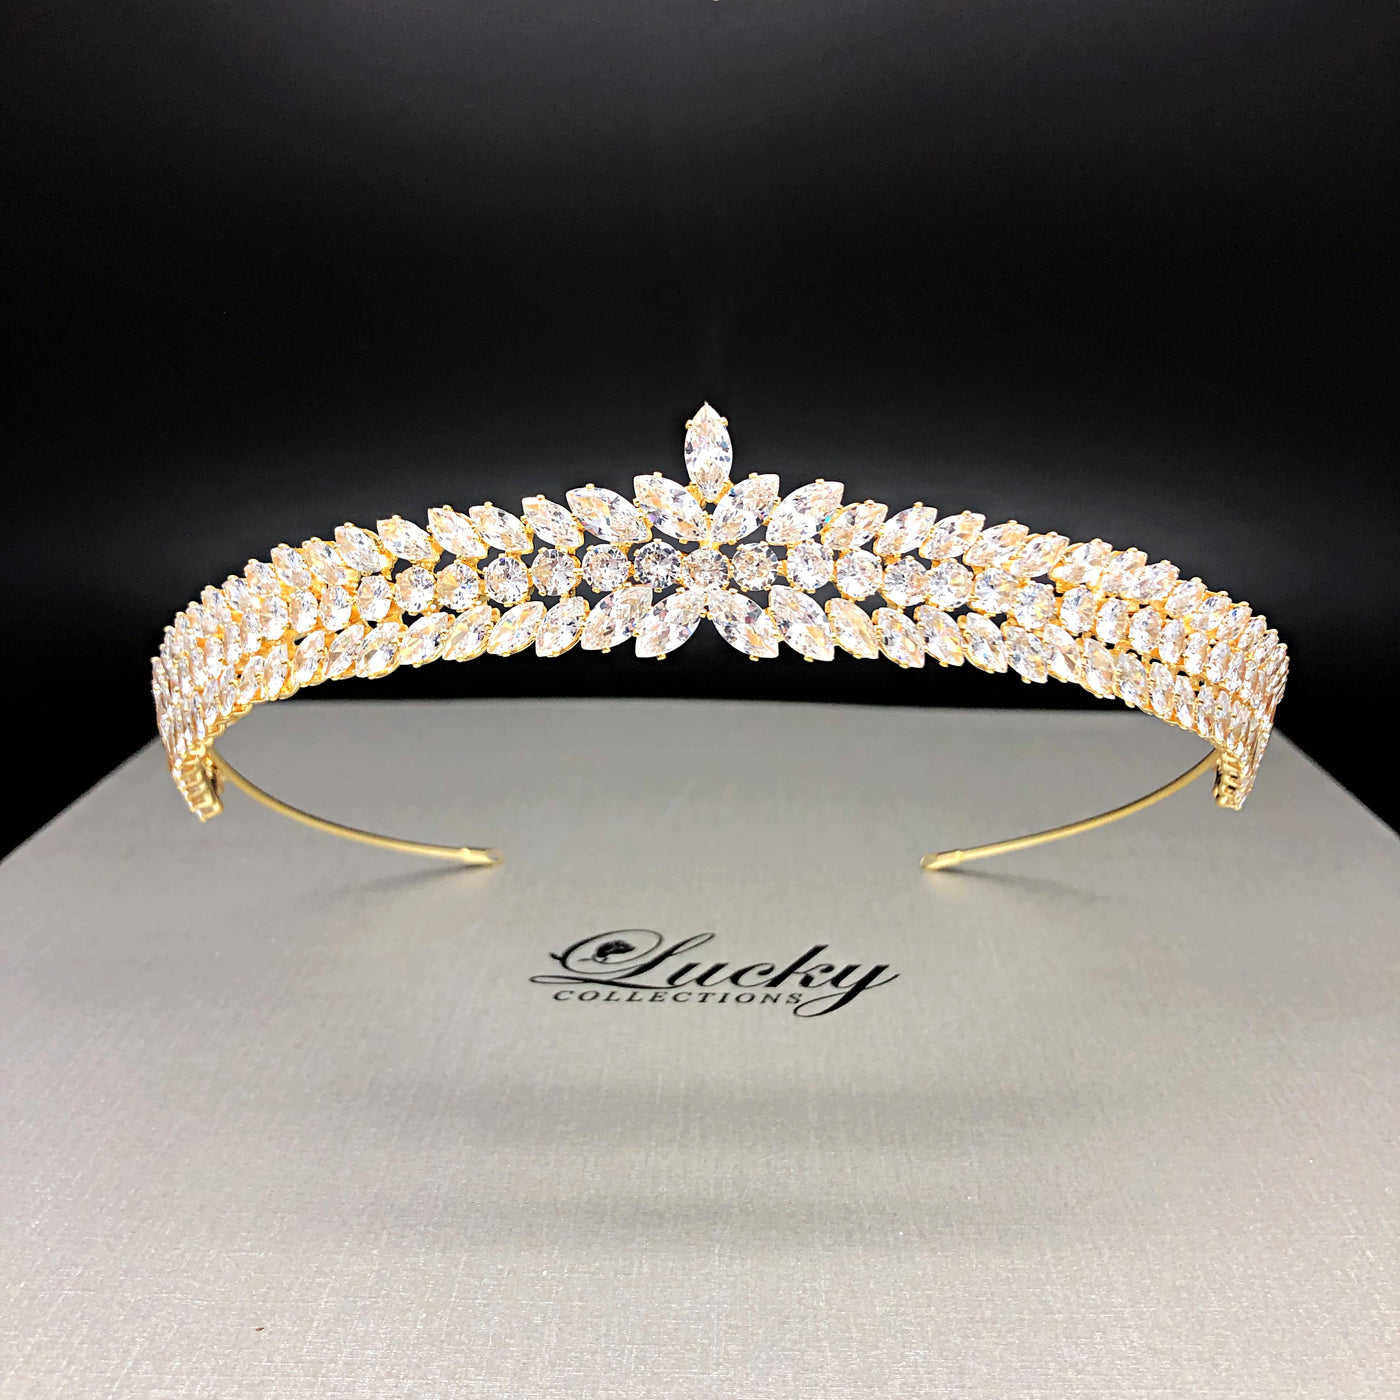 Small Zirconia Tiara, 1 Inch High, Dainty for All Occasions by Lucky Collections ™